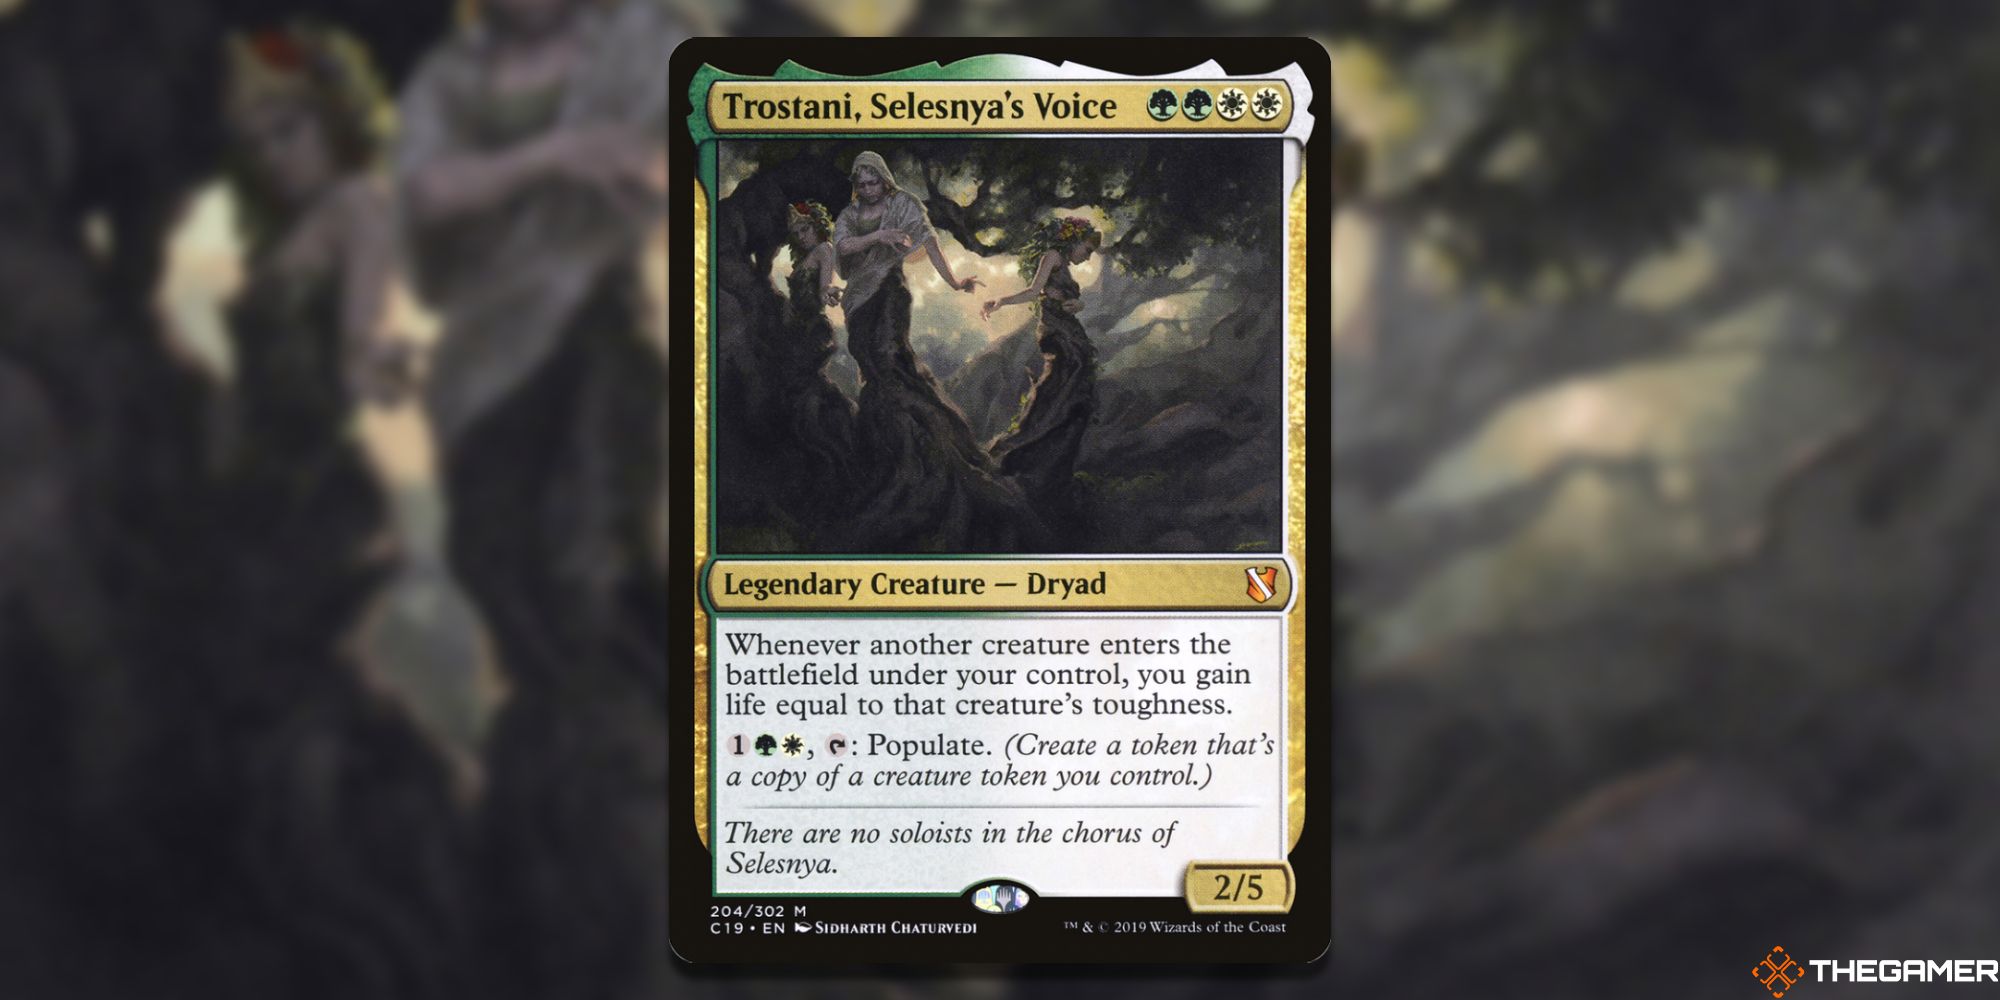 Image of the Trostani Selesnyas Voice card in Magic: The Gathering, with art by Sidharth Chaturvedi